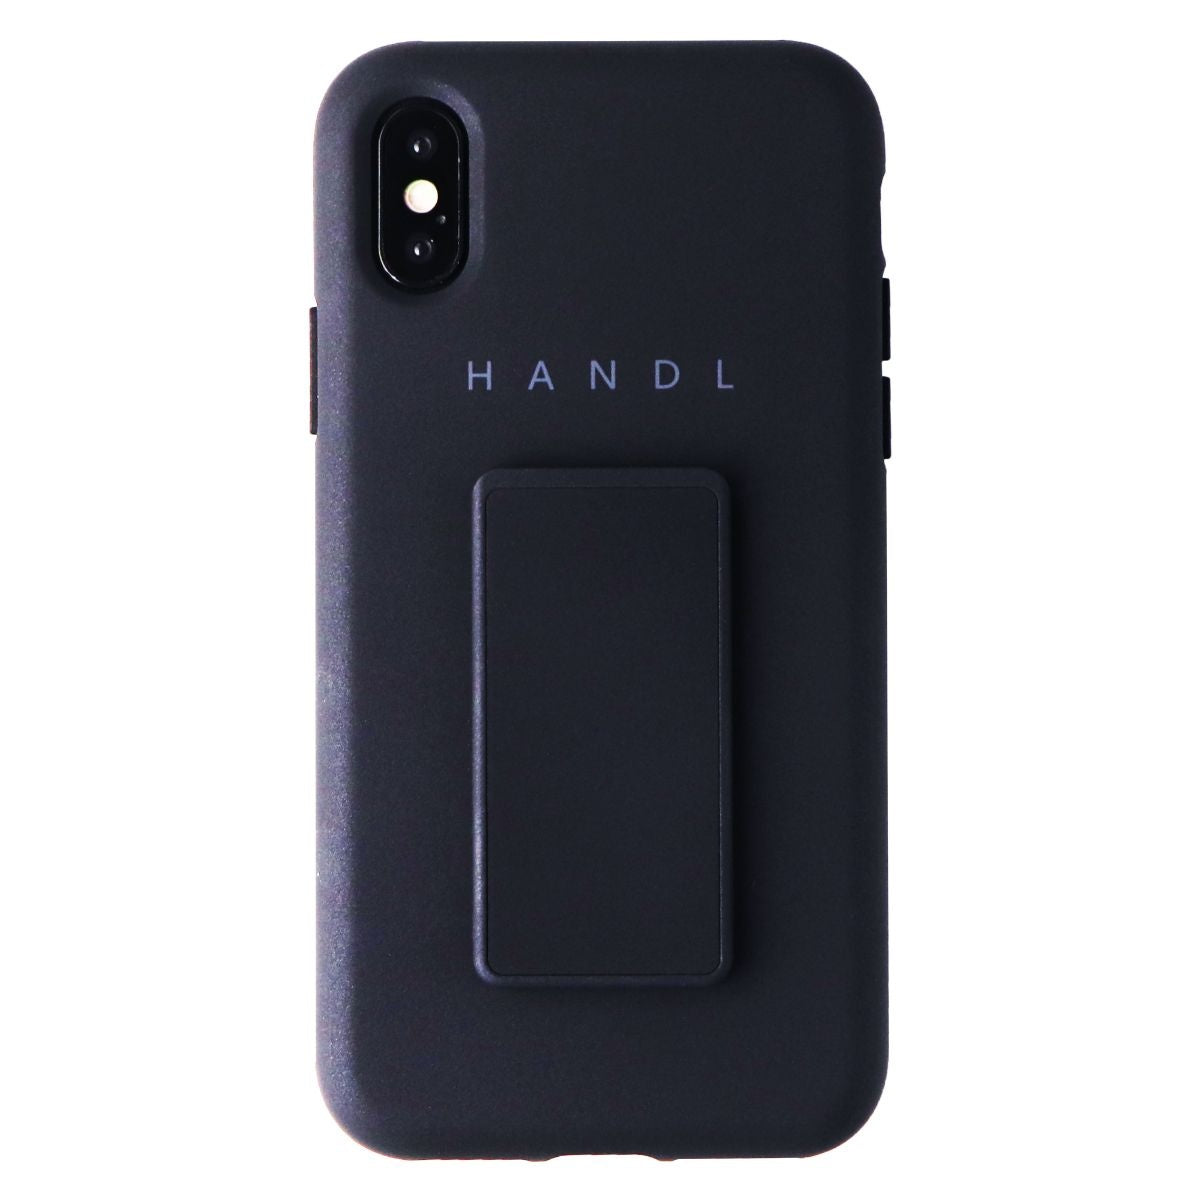 HANDL Hard Case with Built-in Hand Grip for Apple iPhone Xs & X - Matte Black Cell Phone - Cases, Covers & Skins HANDL    - Simple Cell Bulk Wholesale Pricing - USA Seller